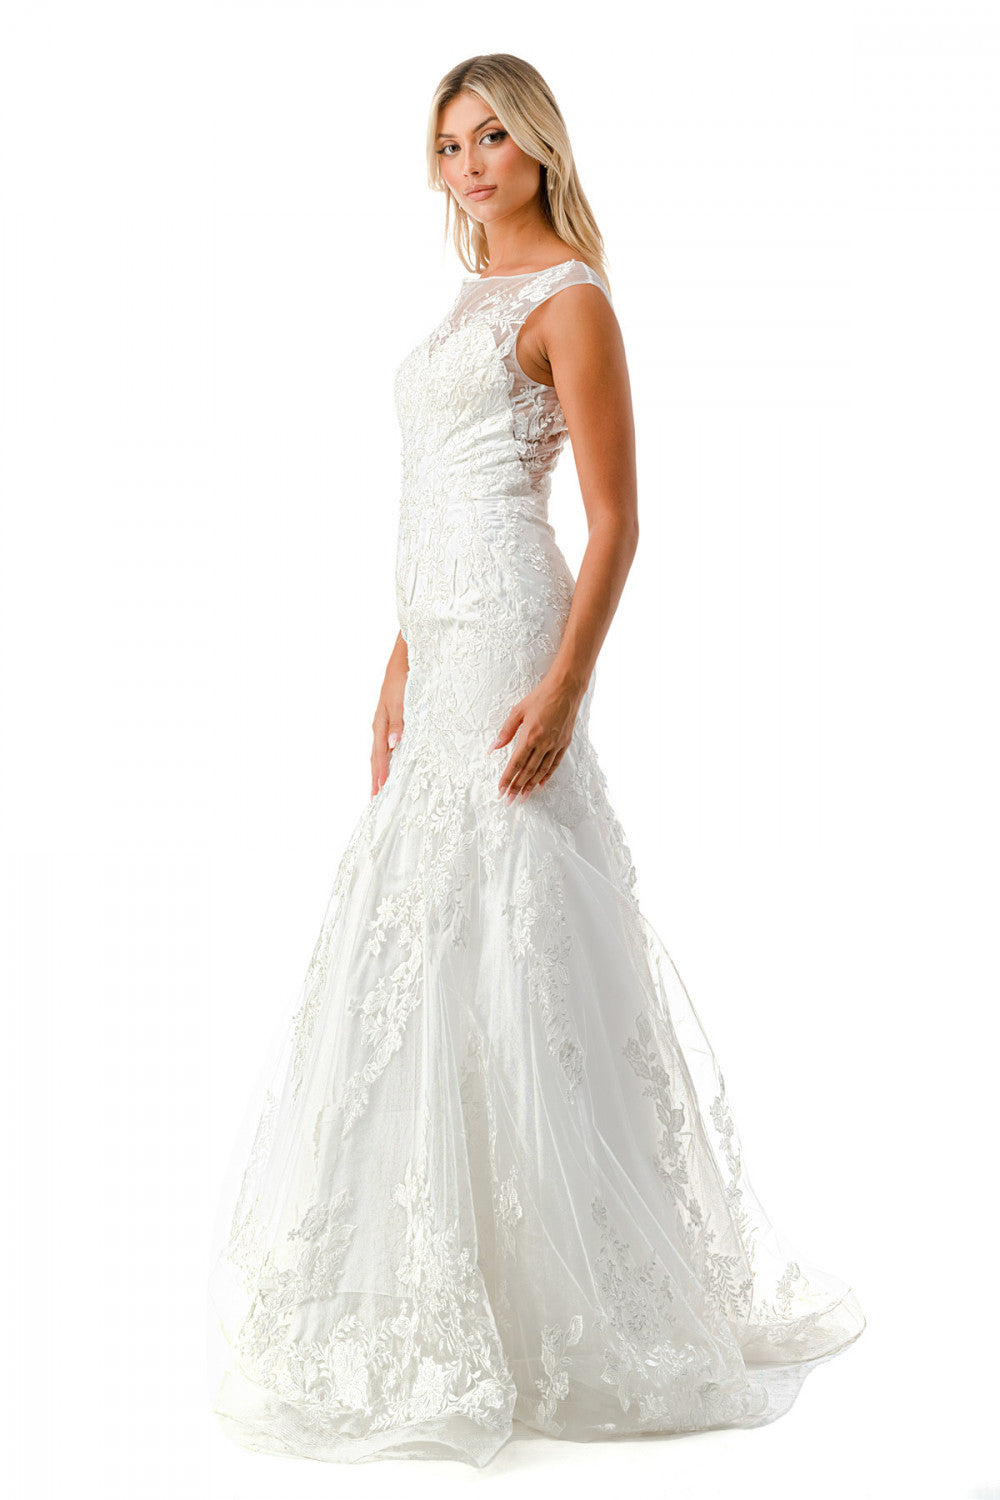 Aspeed Design -MS0021 Sweetheart Illusion Trumpet Bridal Gown